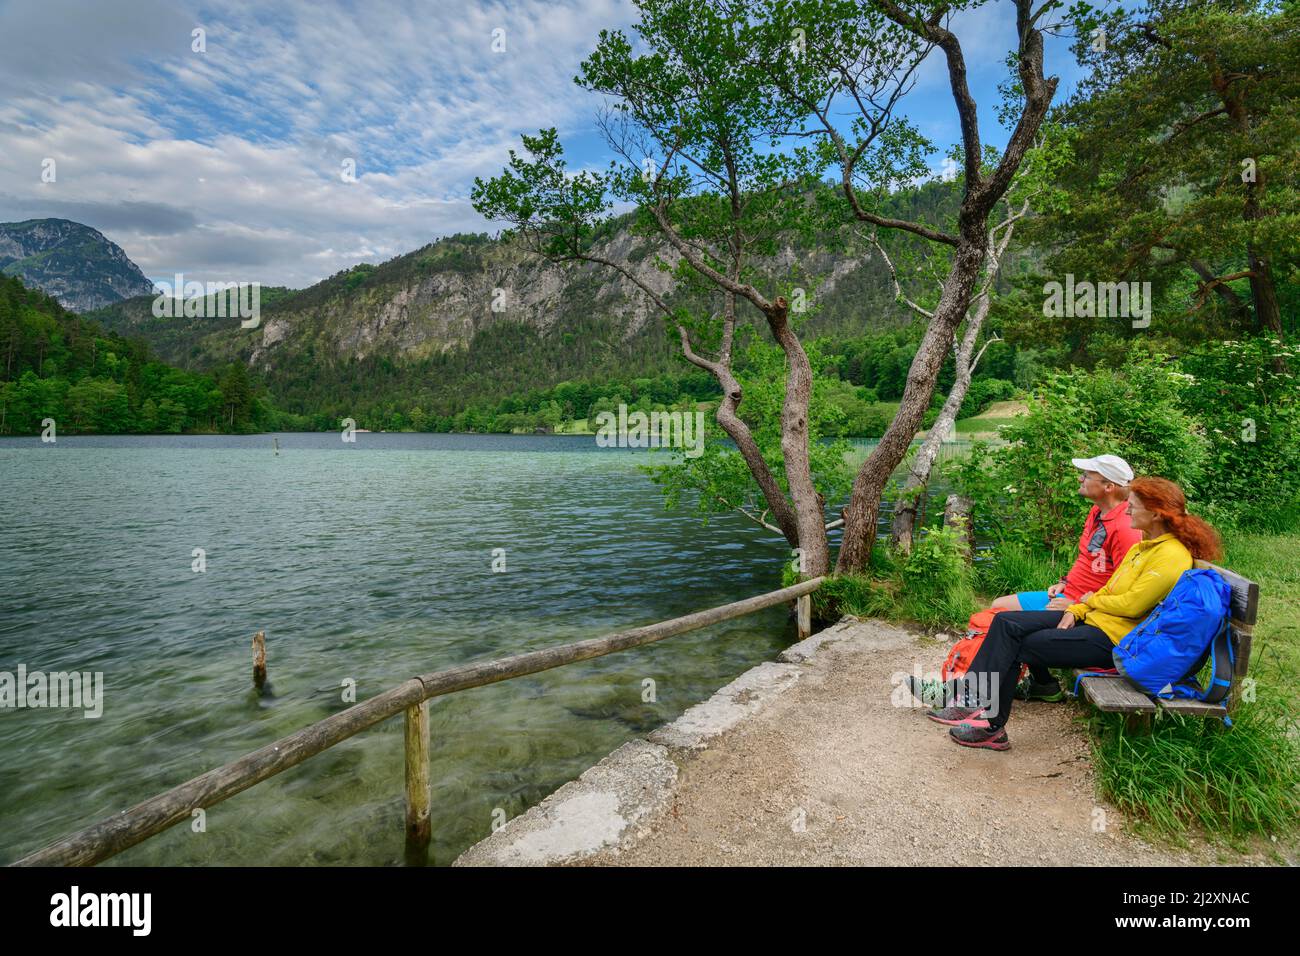 Man and woman while hiking sit on bench and look at Thumsee, Thumsee, Berchtesgaden Alps, Salzalpensteig, Upper Bavaria, Bavaria, Germany Stock Photo